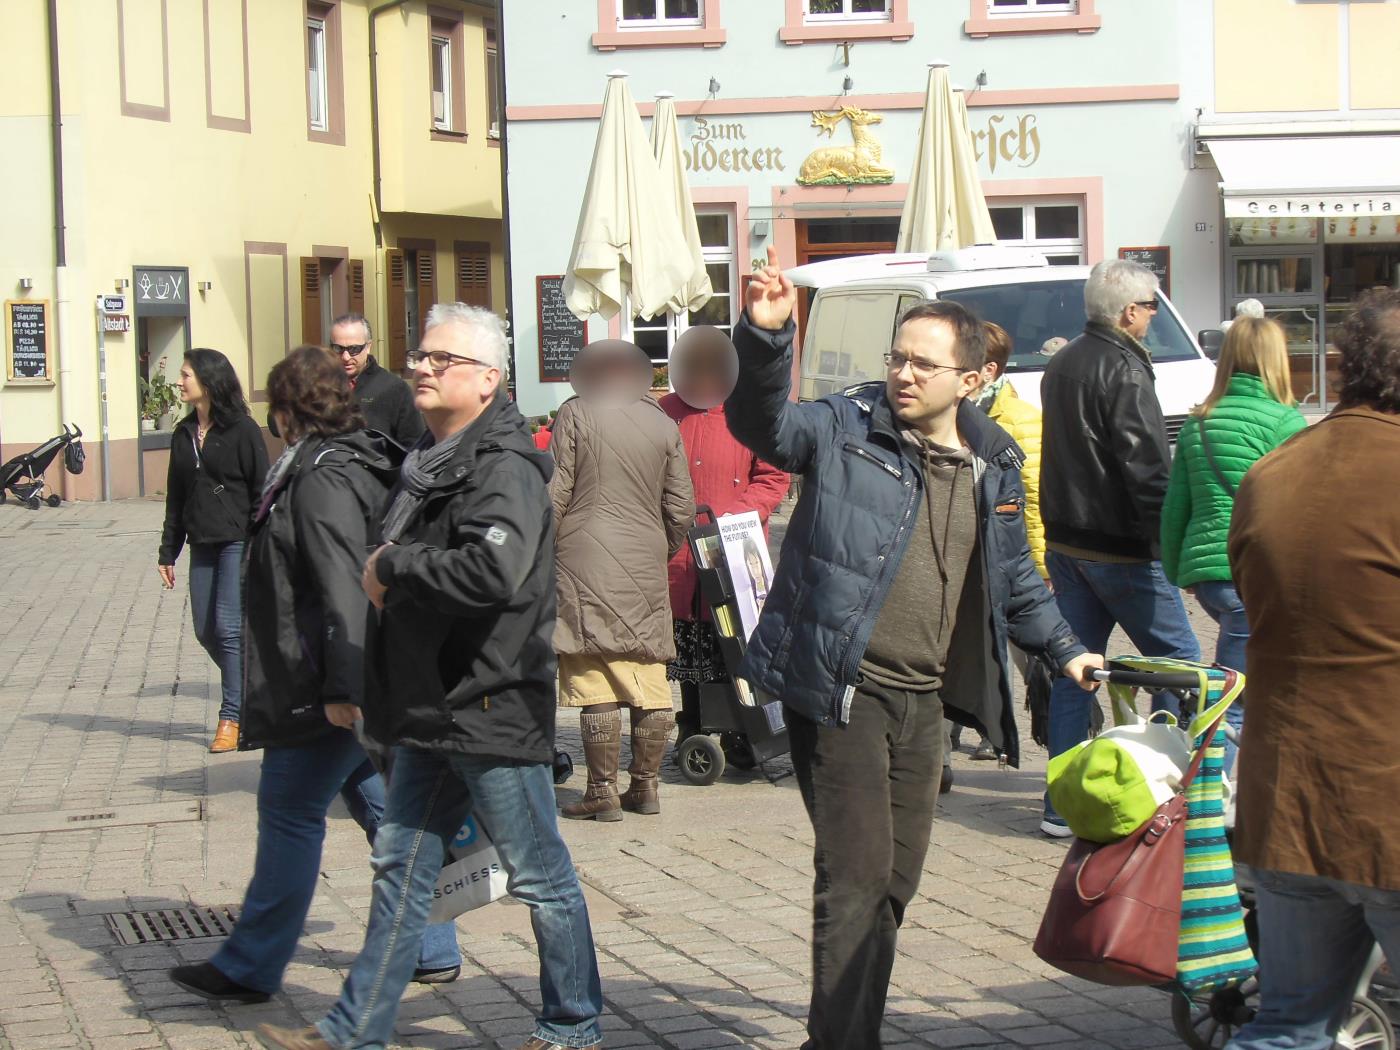 Jehovah's Witnesses in Speyer hypocrite self-confidence